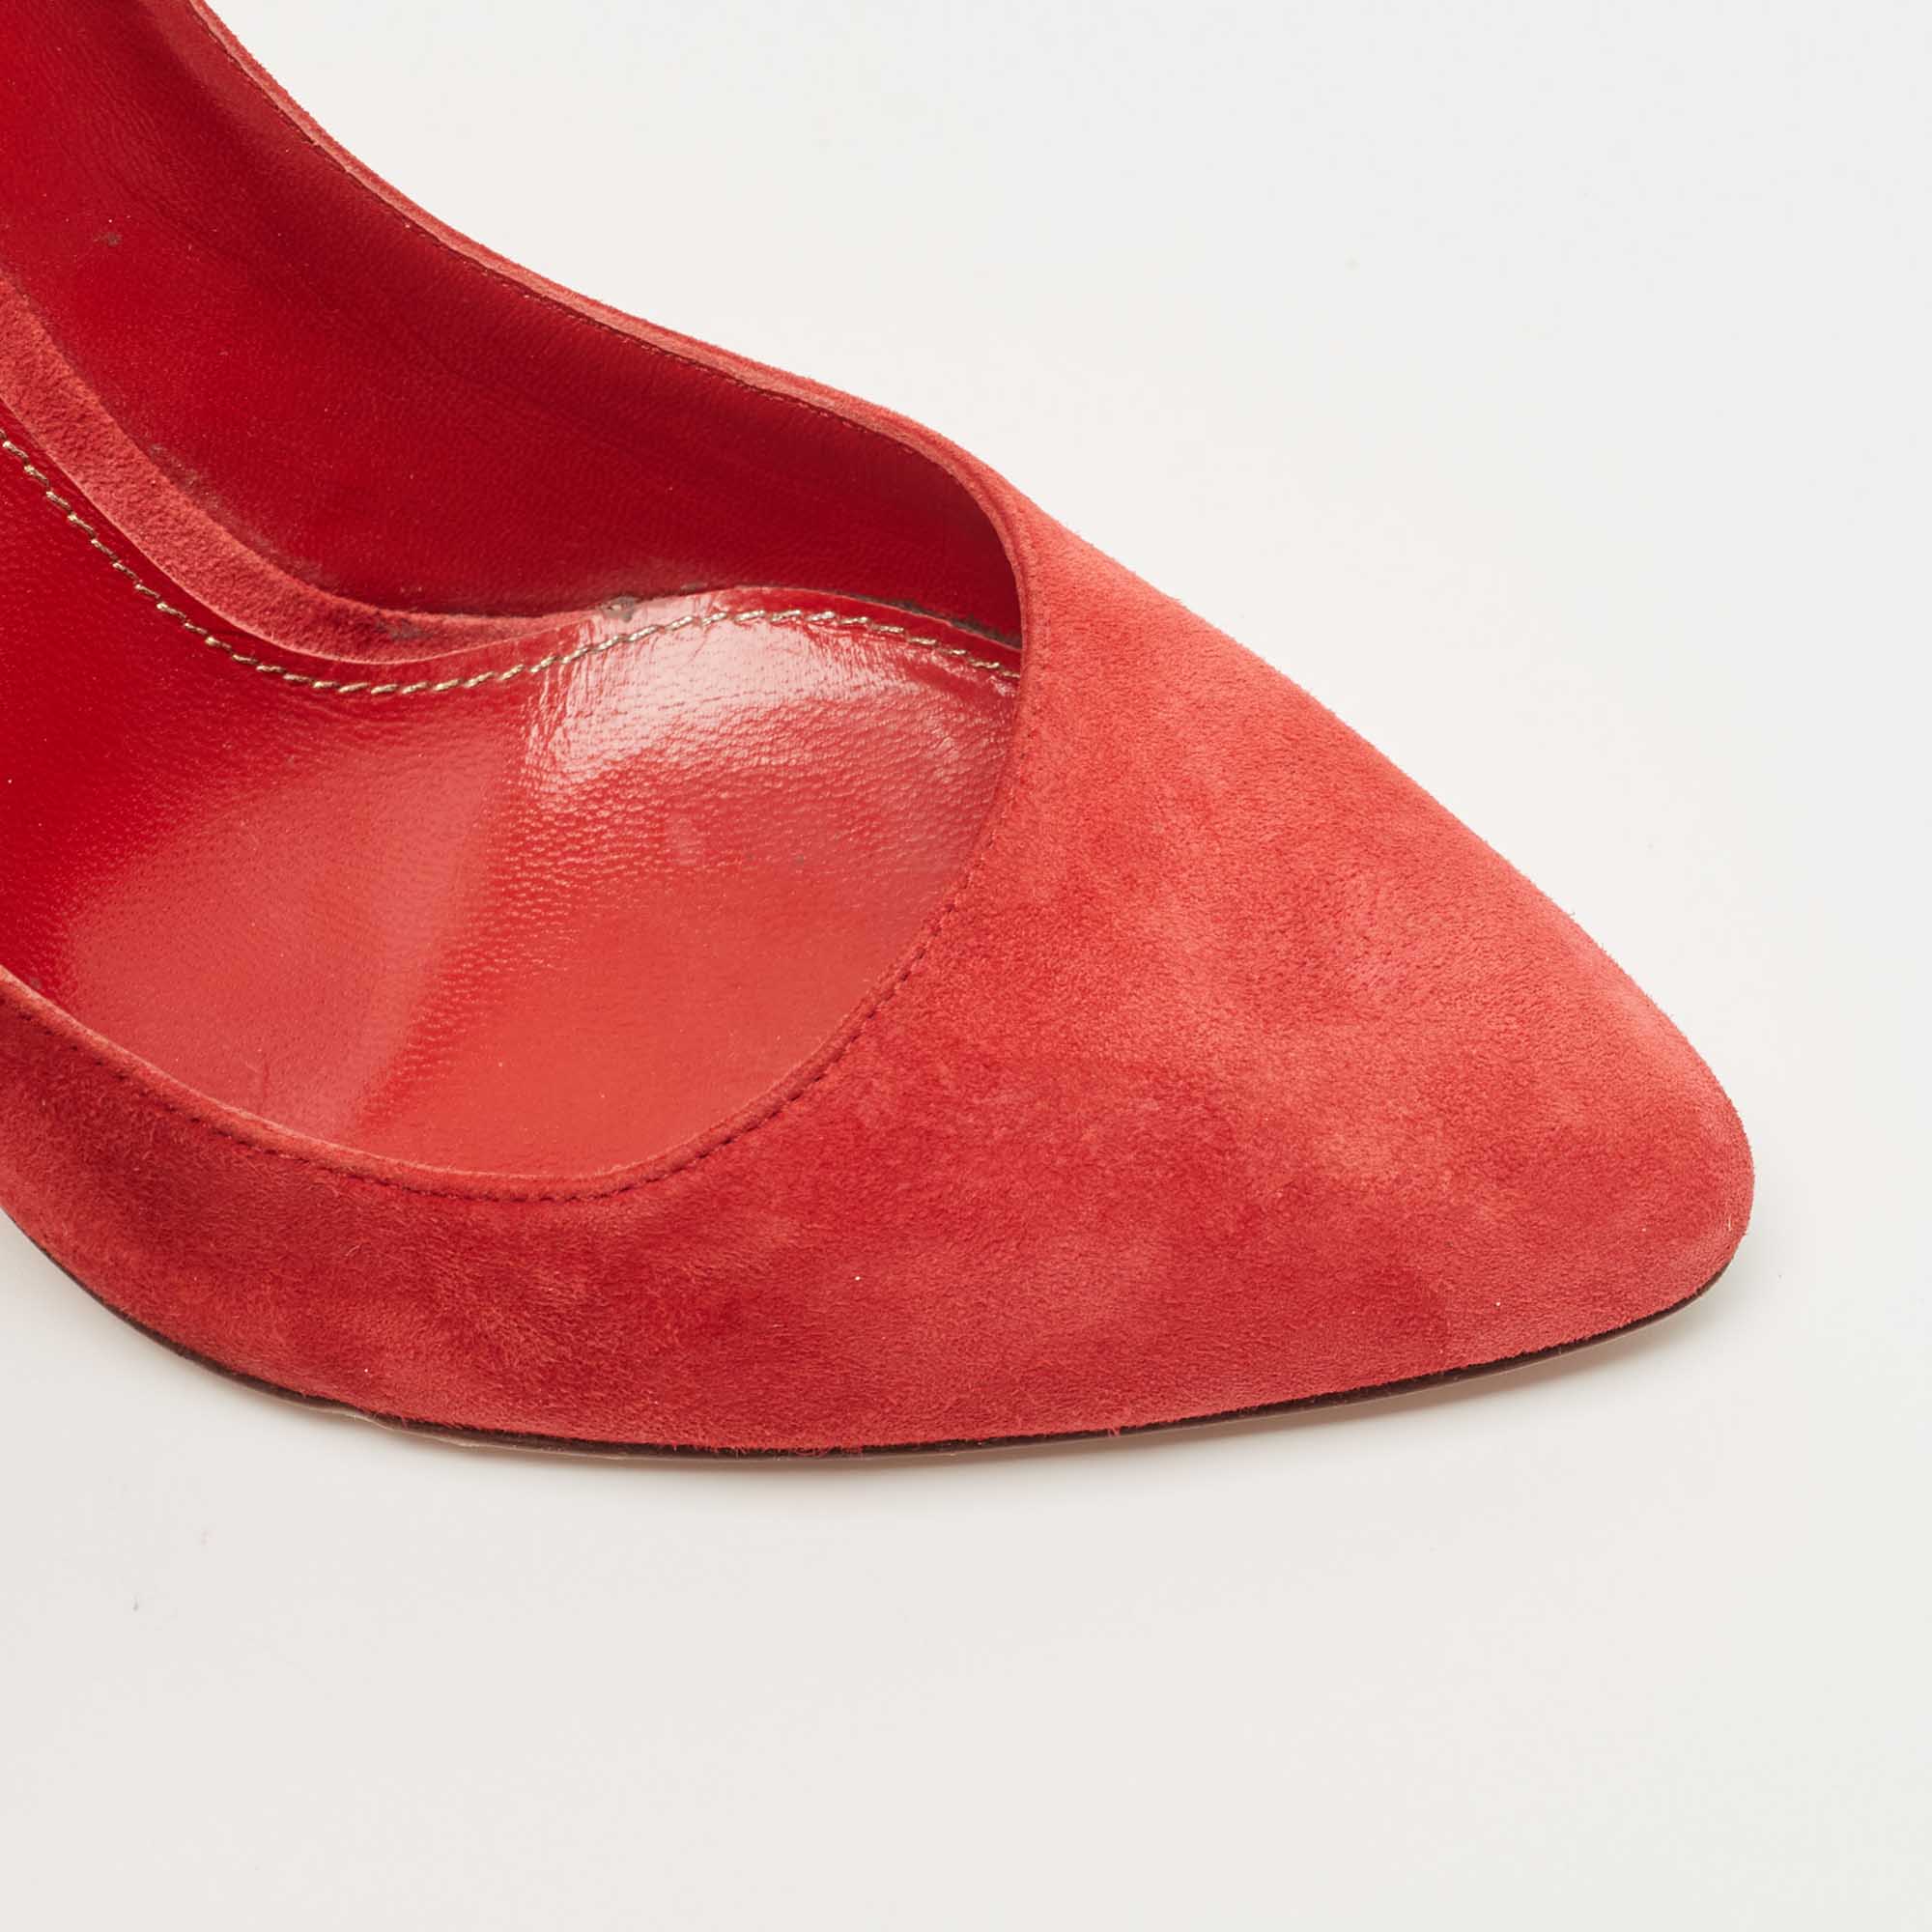 Sergio Rossi Red Suede Pointed Toe Pumps Size 37.5